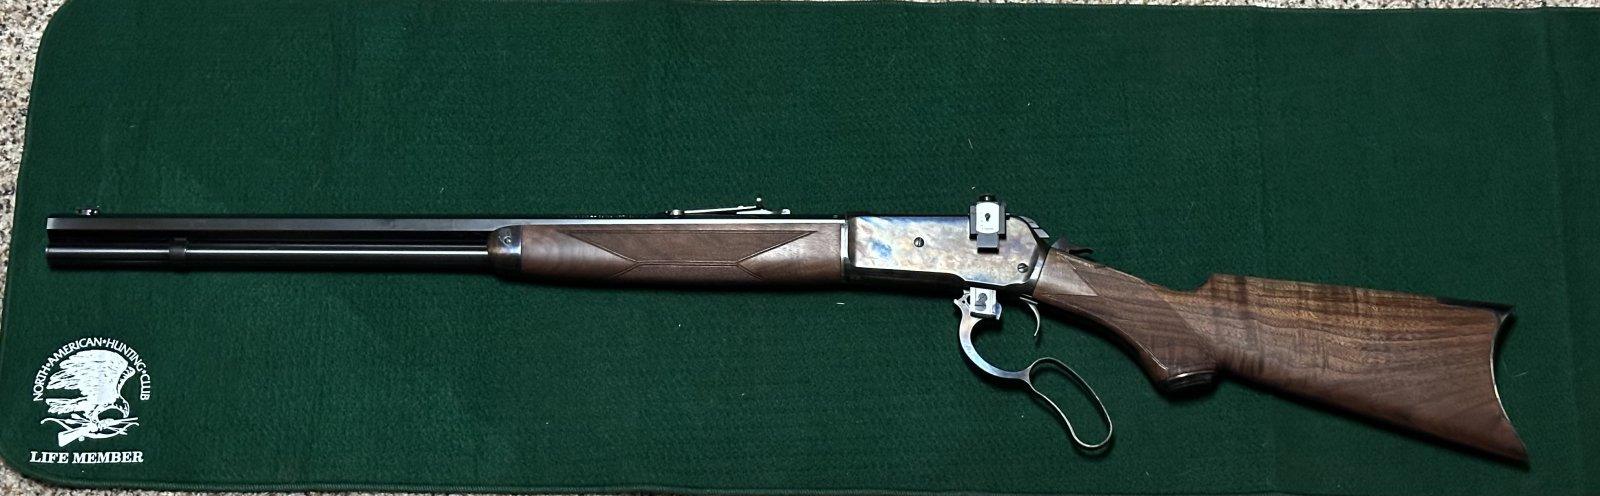 Winchester 1886 .45-70 lever action.jpg